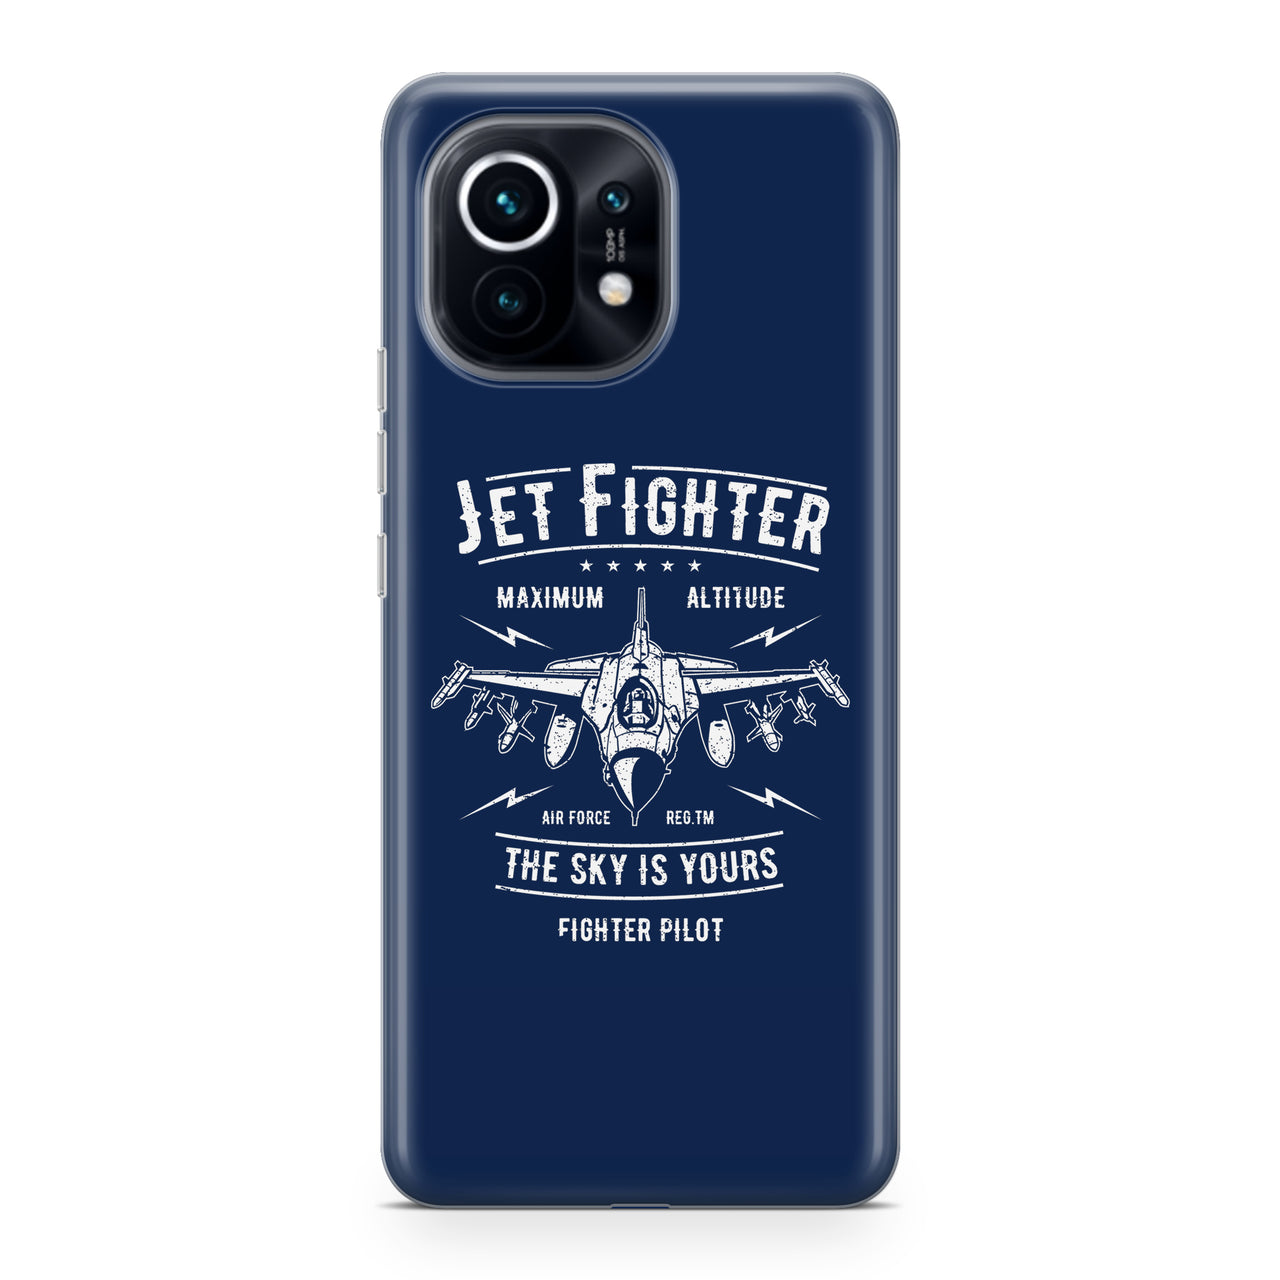 Jet Fighter - The Sky is Yours Designed Xiaomi Cases